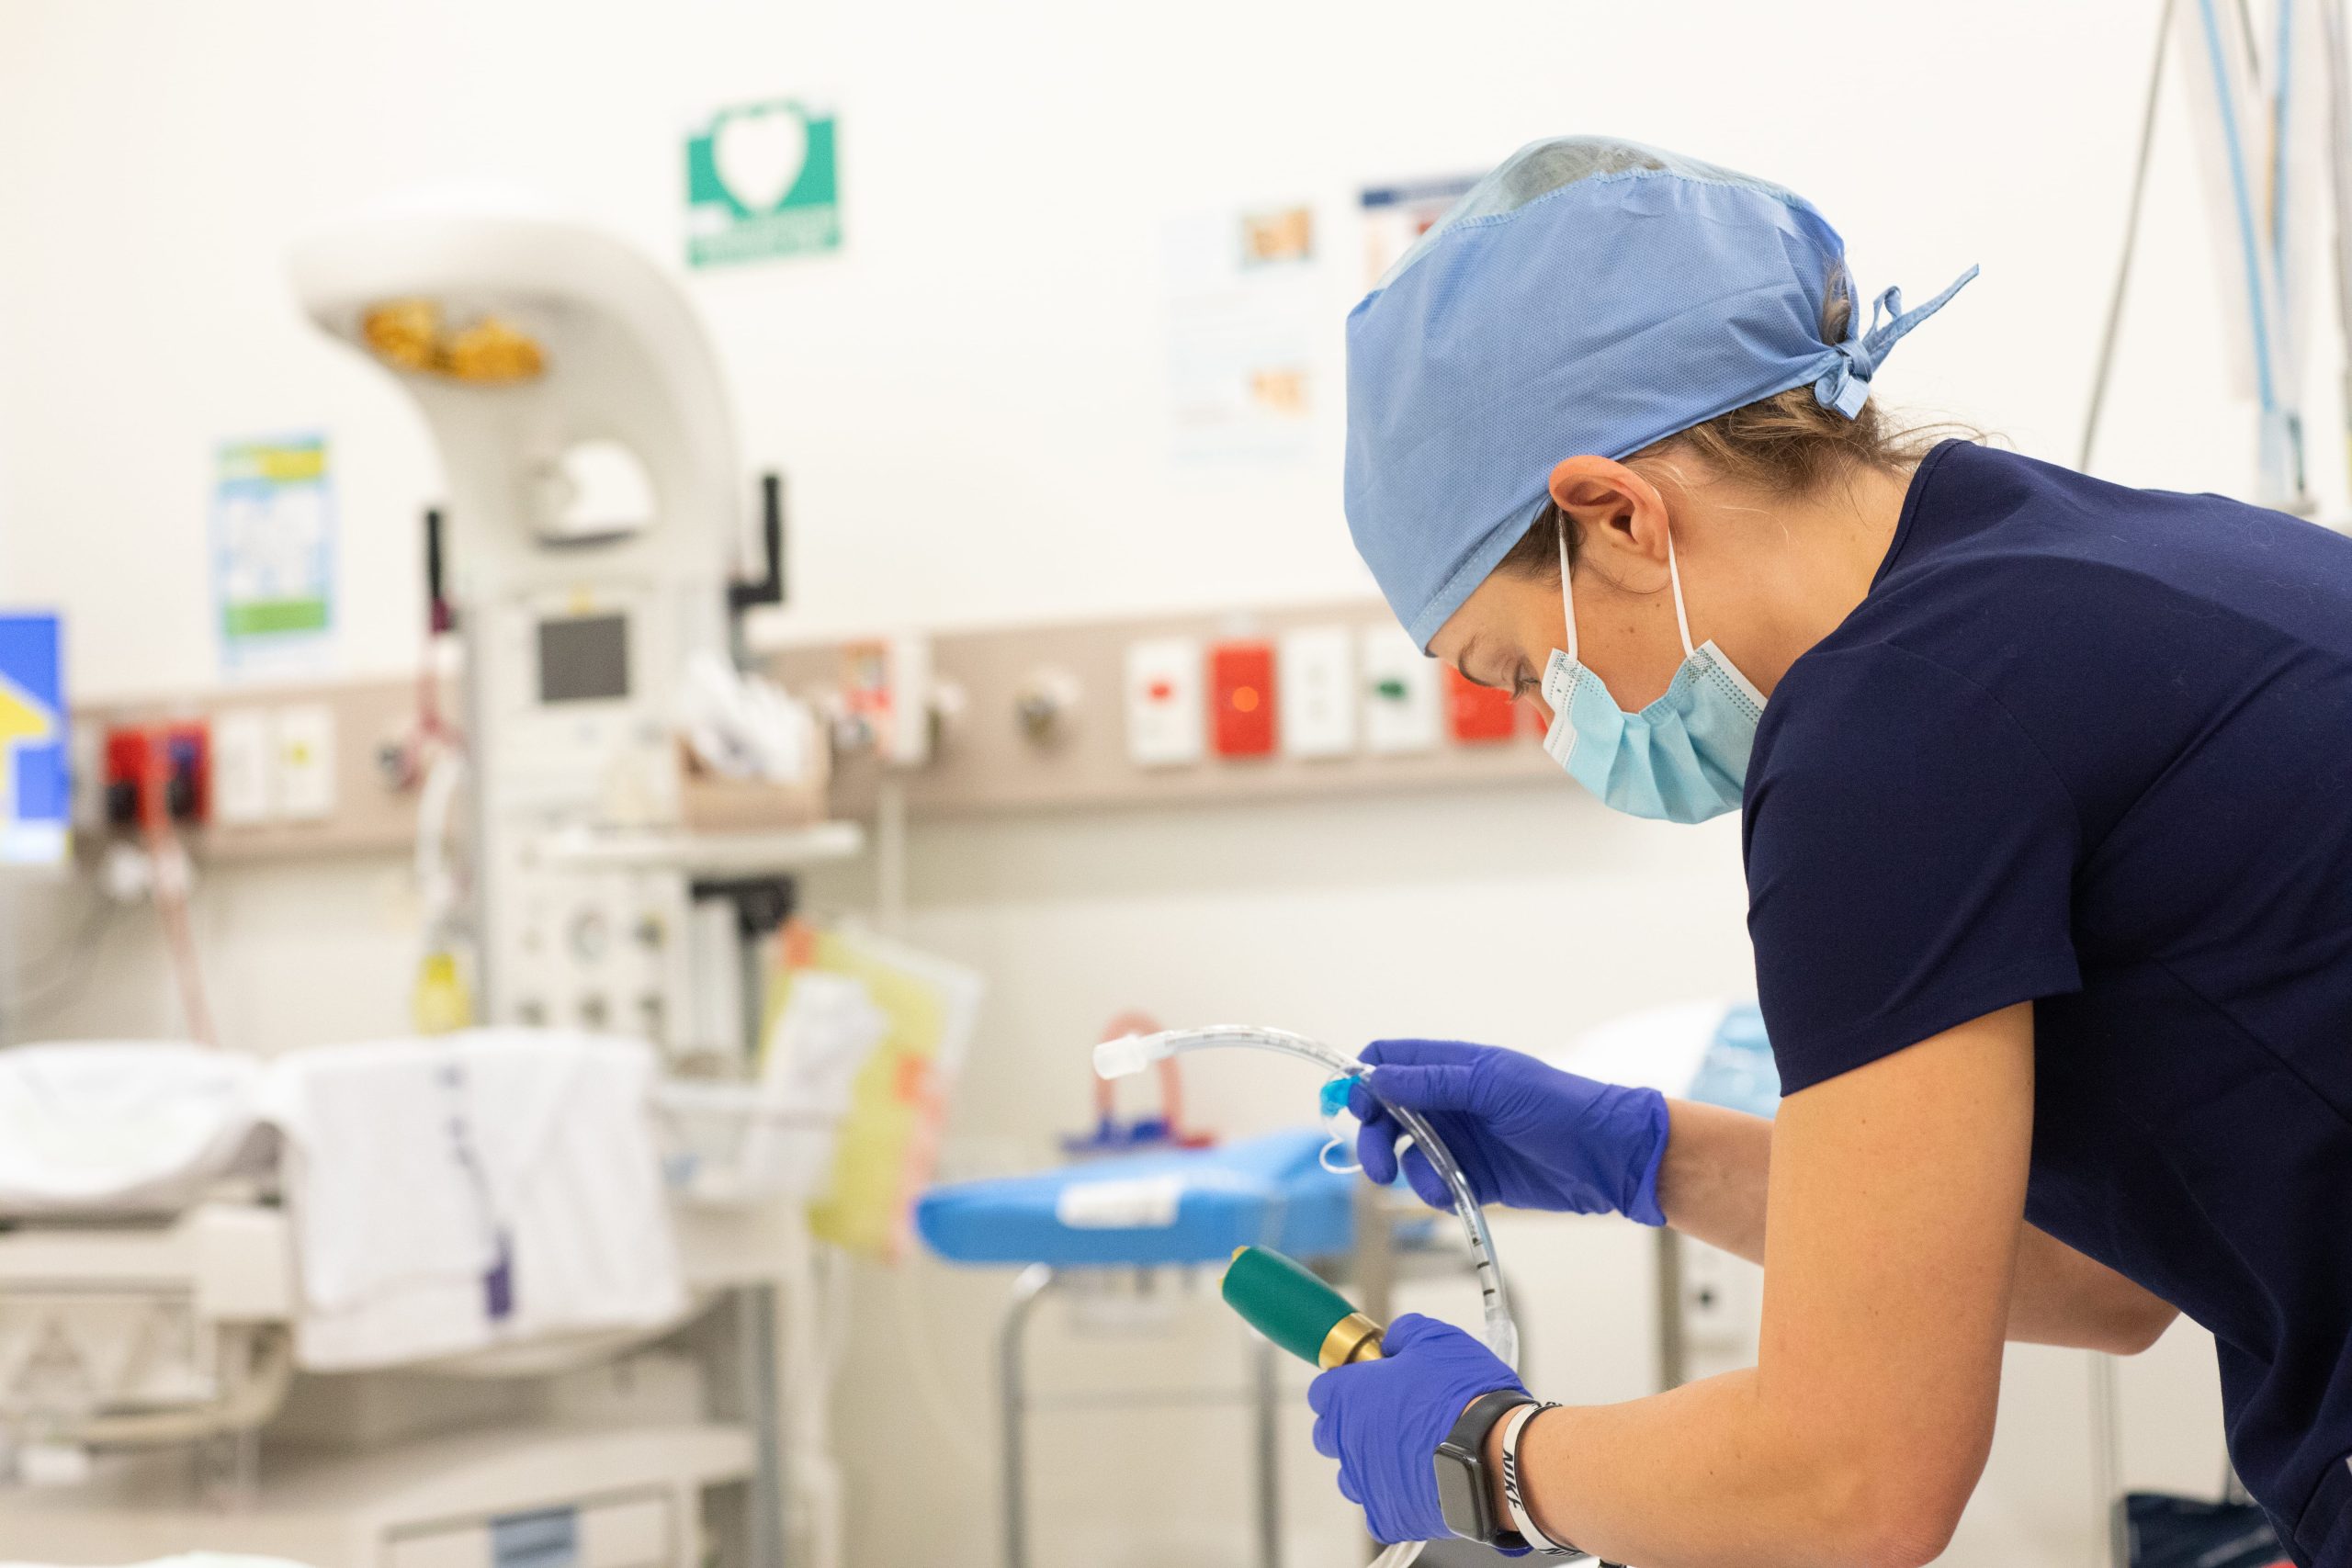 https://anaesthesia.nz/wp-content/uploads/2022/03/Morgan-in-scrubs-3-min-scaled.jpg